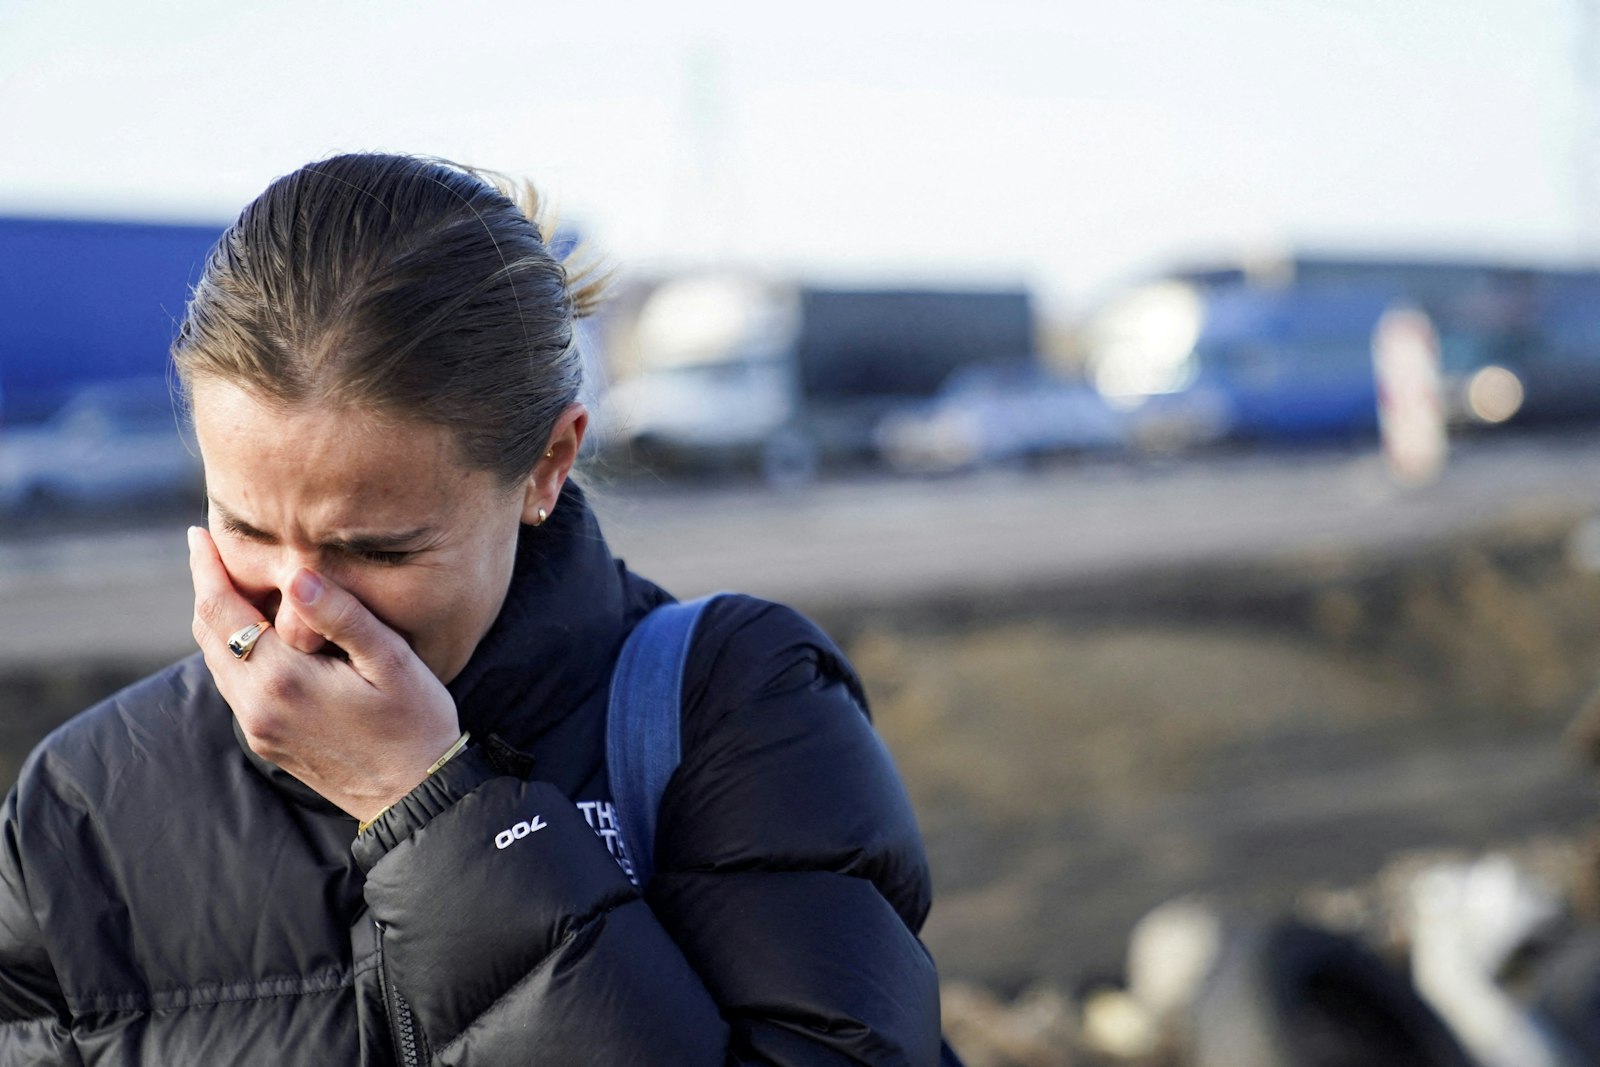 Pixie, who said she was U.S. citizen but did not give her last name, cries after crossing the border into Medyka, Poland, Feb. 24, 2022, after fleeing the violence in Ukraine. (CNS photo/Bryan Woolston, Reuters)